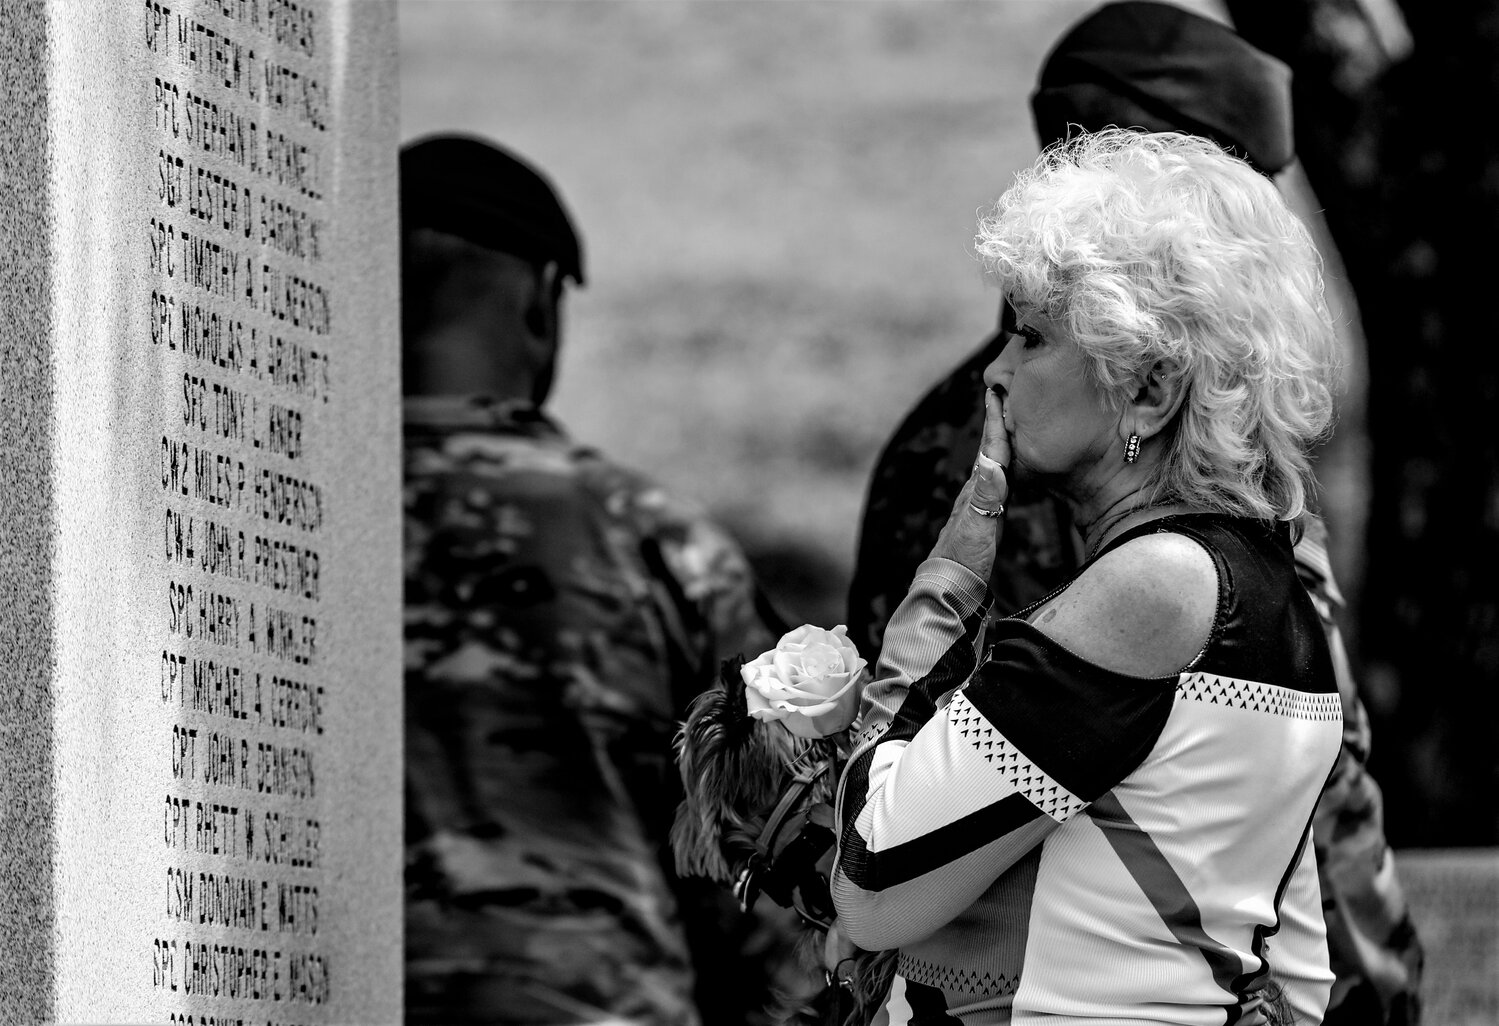 Gold Star families of the 82nd Airborne Division honor fallen service members during the All American Week memorial ceremony on Tuesday on Fort Bragg